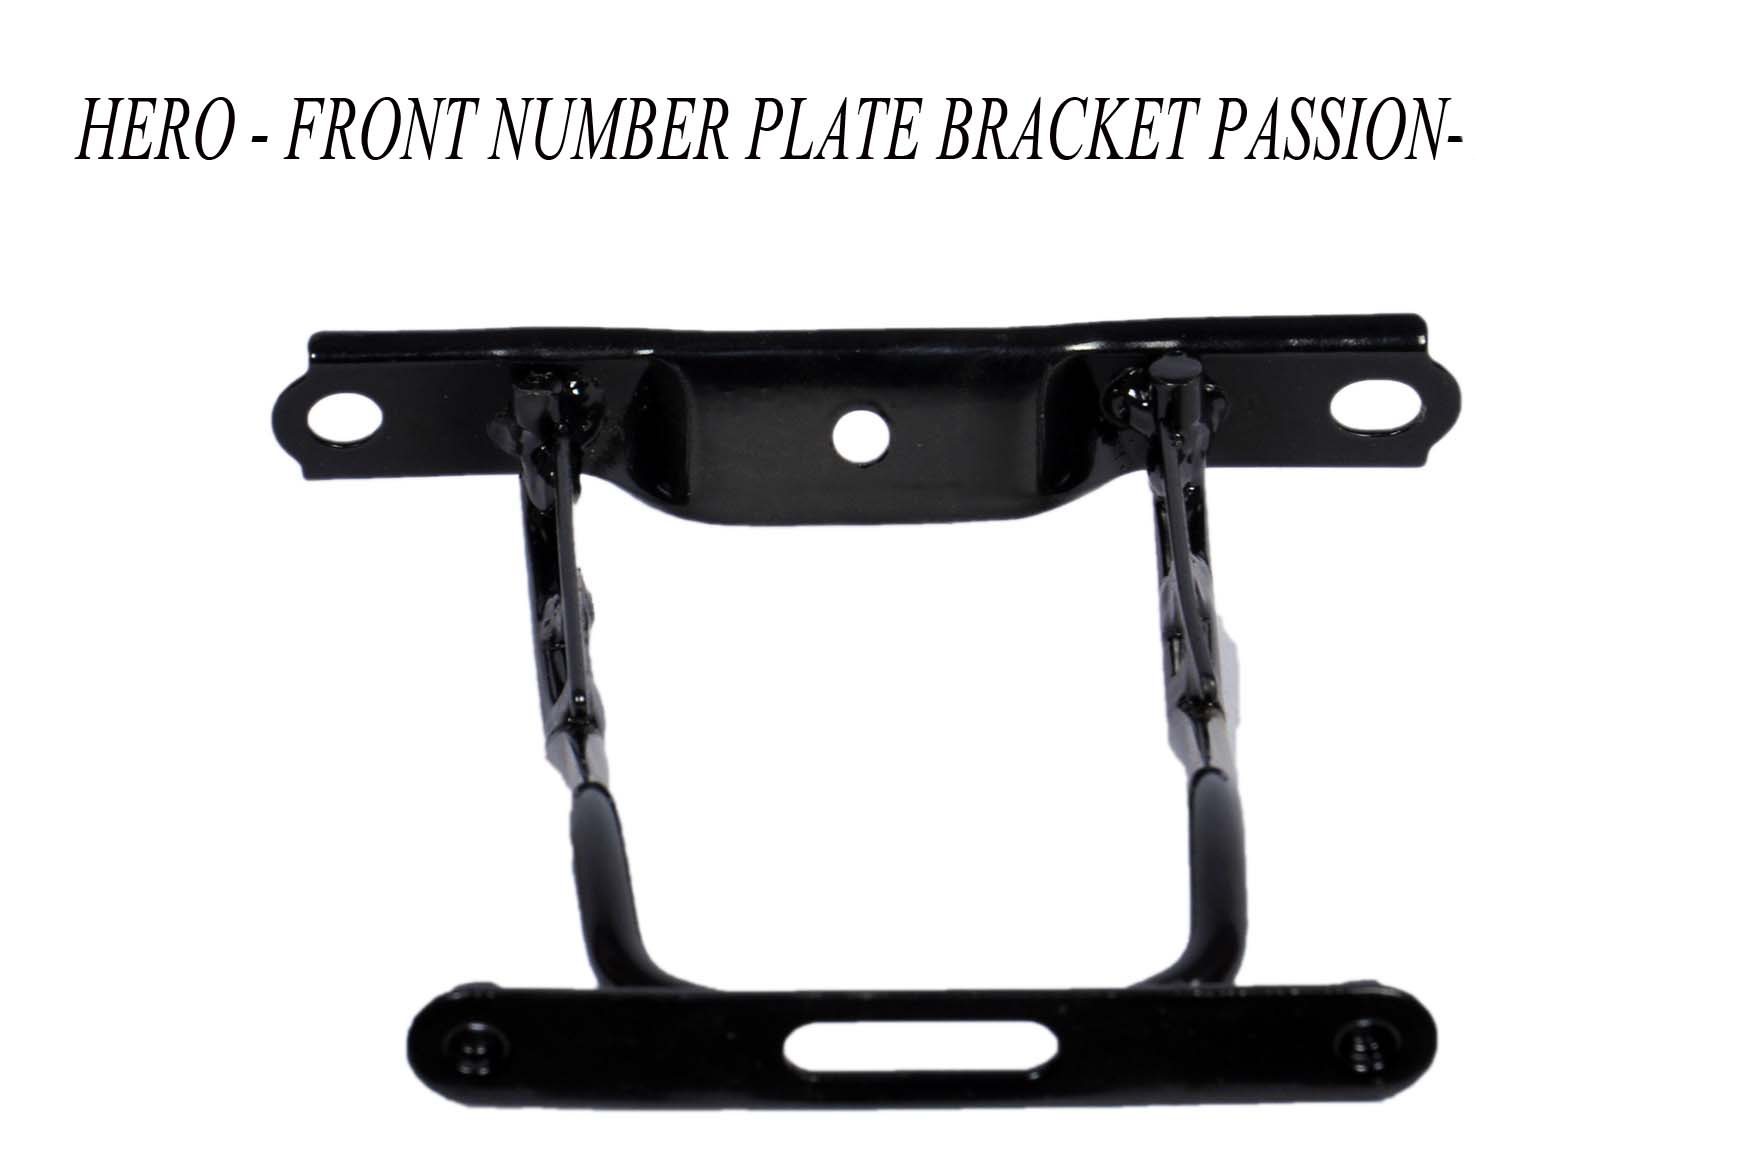 HERO FRONT NUMBER PLATE BRACKET PASSION